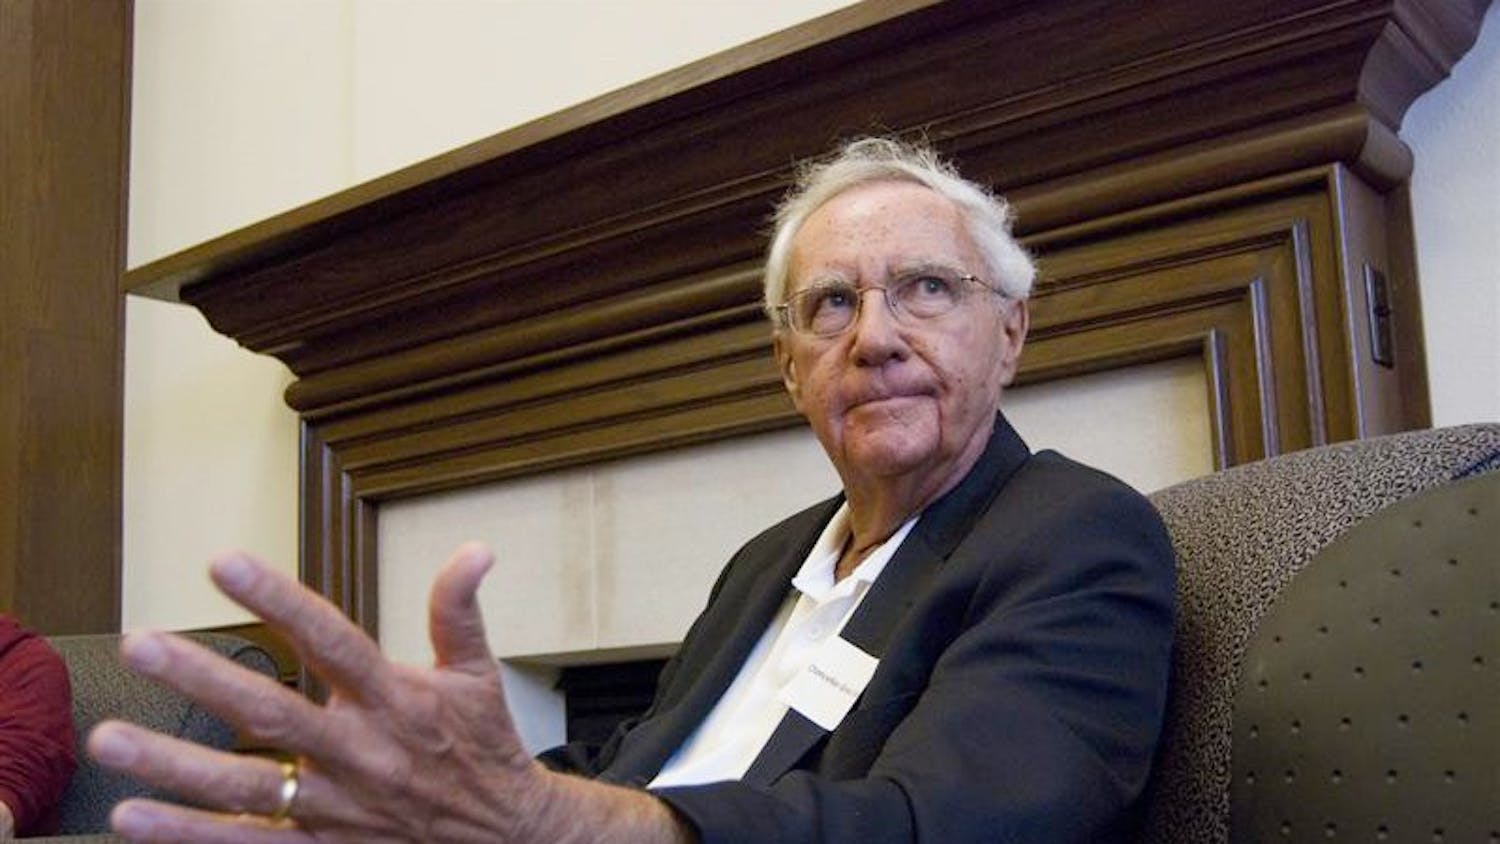 Then-Chancellor Ken Gros Louis talks to students during a 2009 fireside chat in the Great Room of the Hutton Honors College. Gros Louis died Thursday at the age of 80.